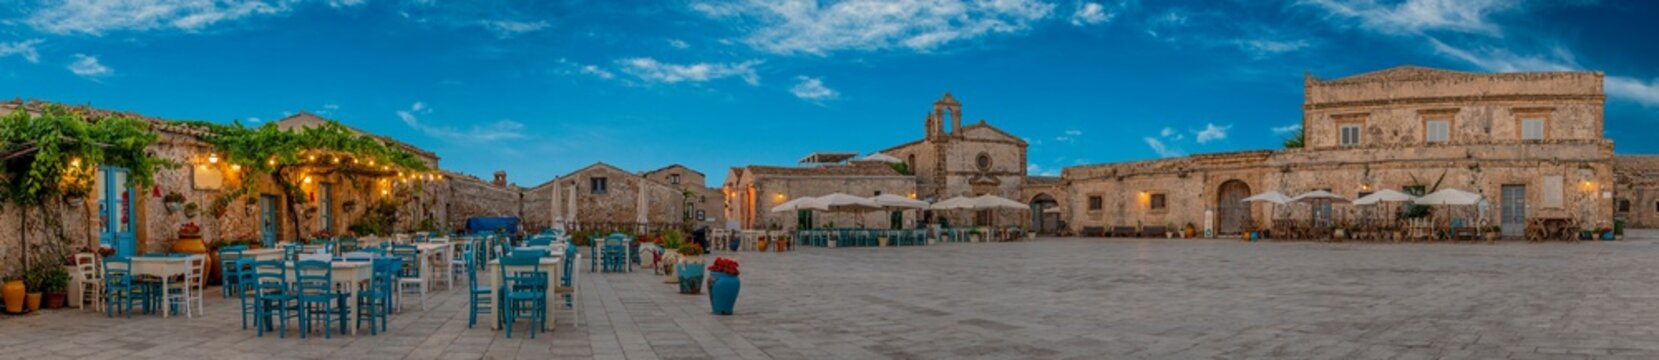 Panoramic view of the picturesque sicilian village Marzamemi, view of the traditional outdoor cafe and the church and the central square, province of Syracuse, Sicily, southern Italy